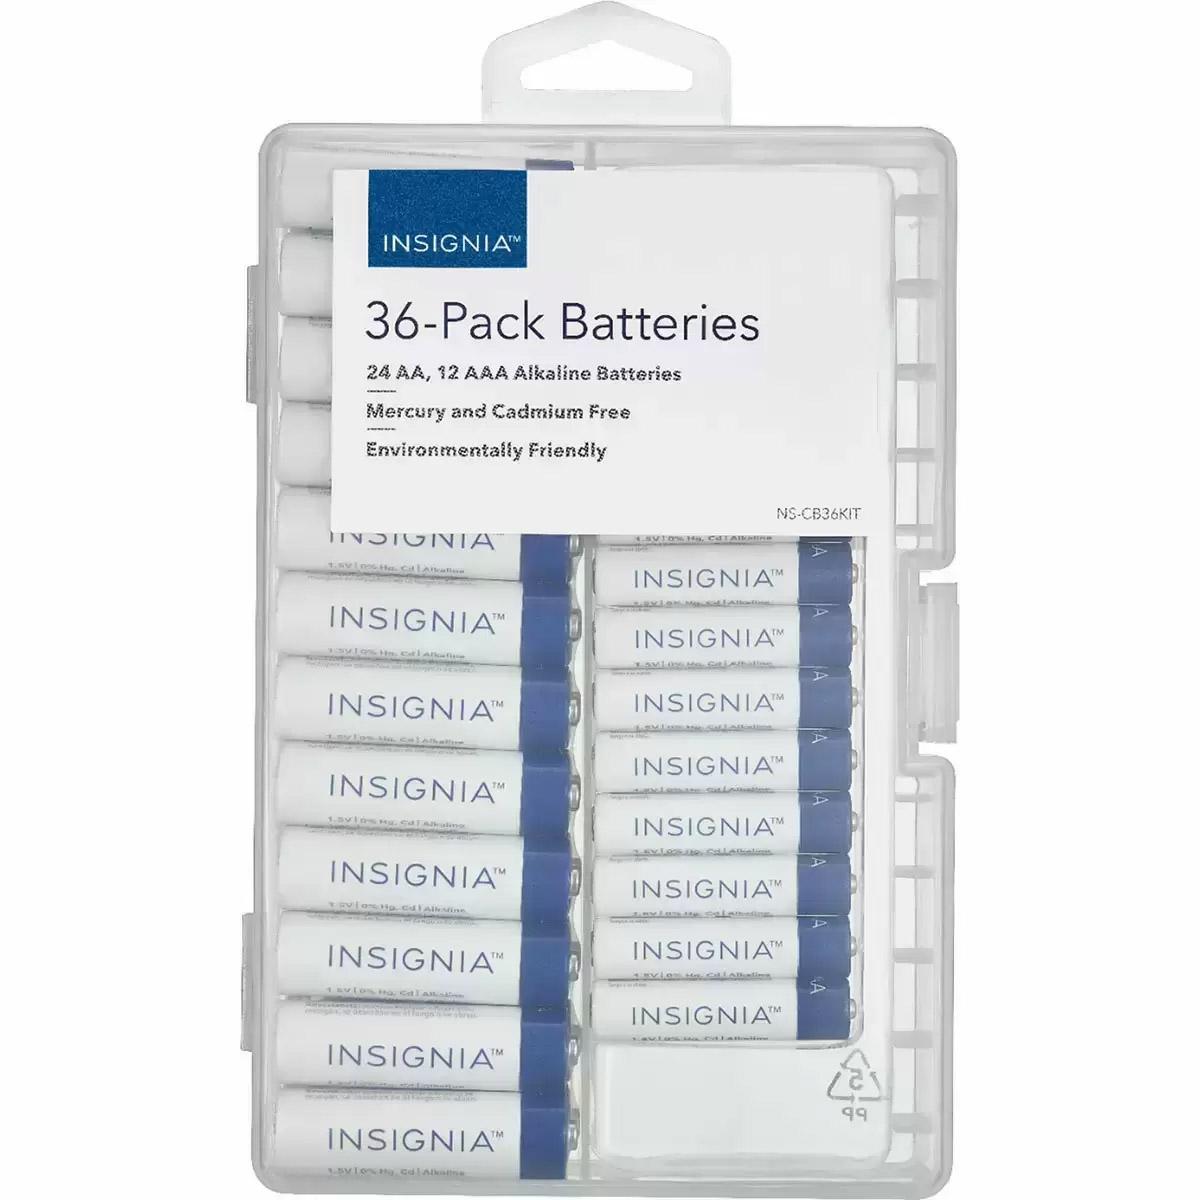 36 Insignia AA and AAA Batteries for $5.95